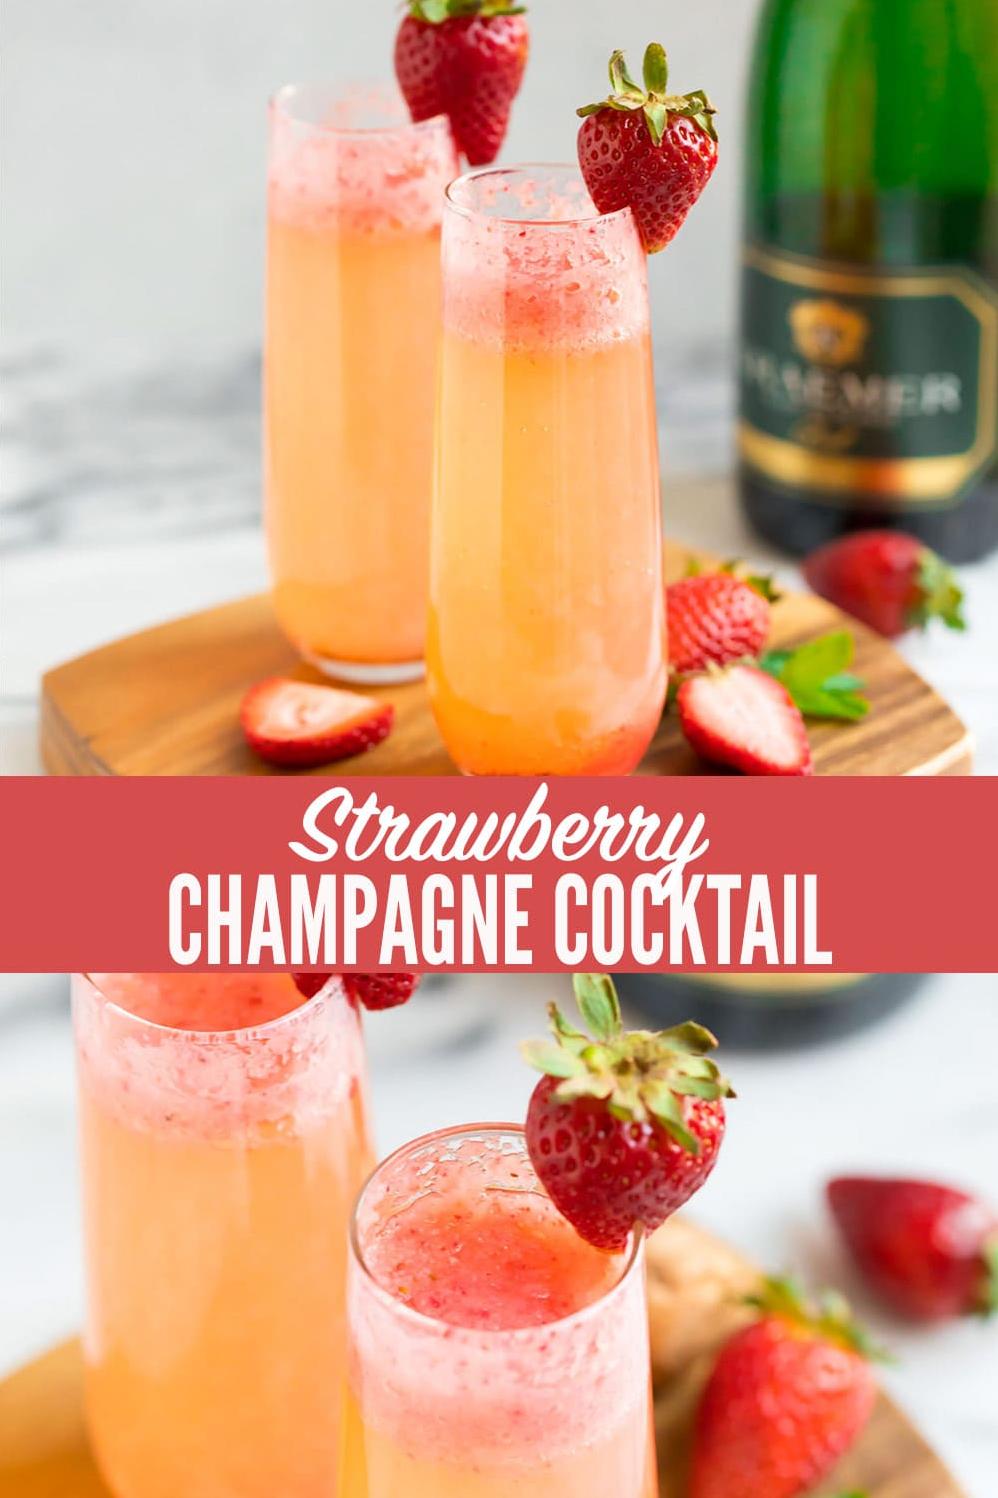  A refreshing way to celebrate any occasion.